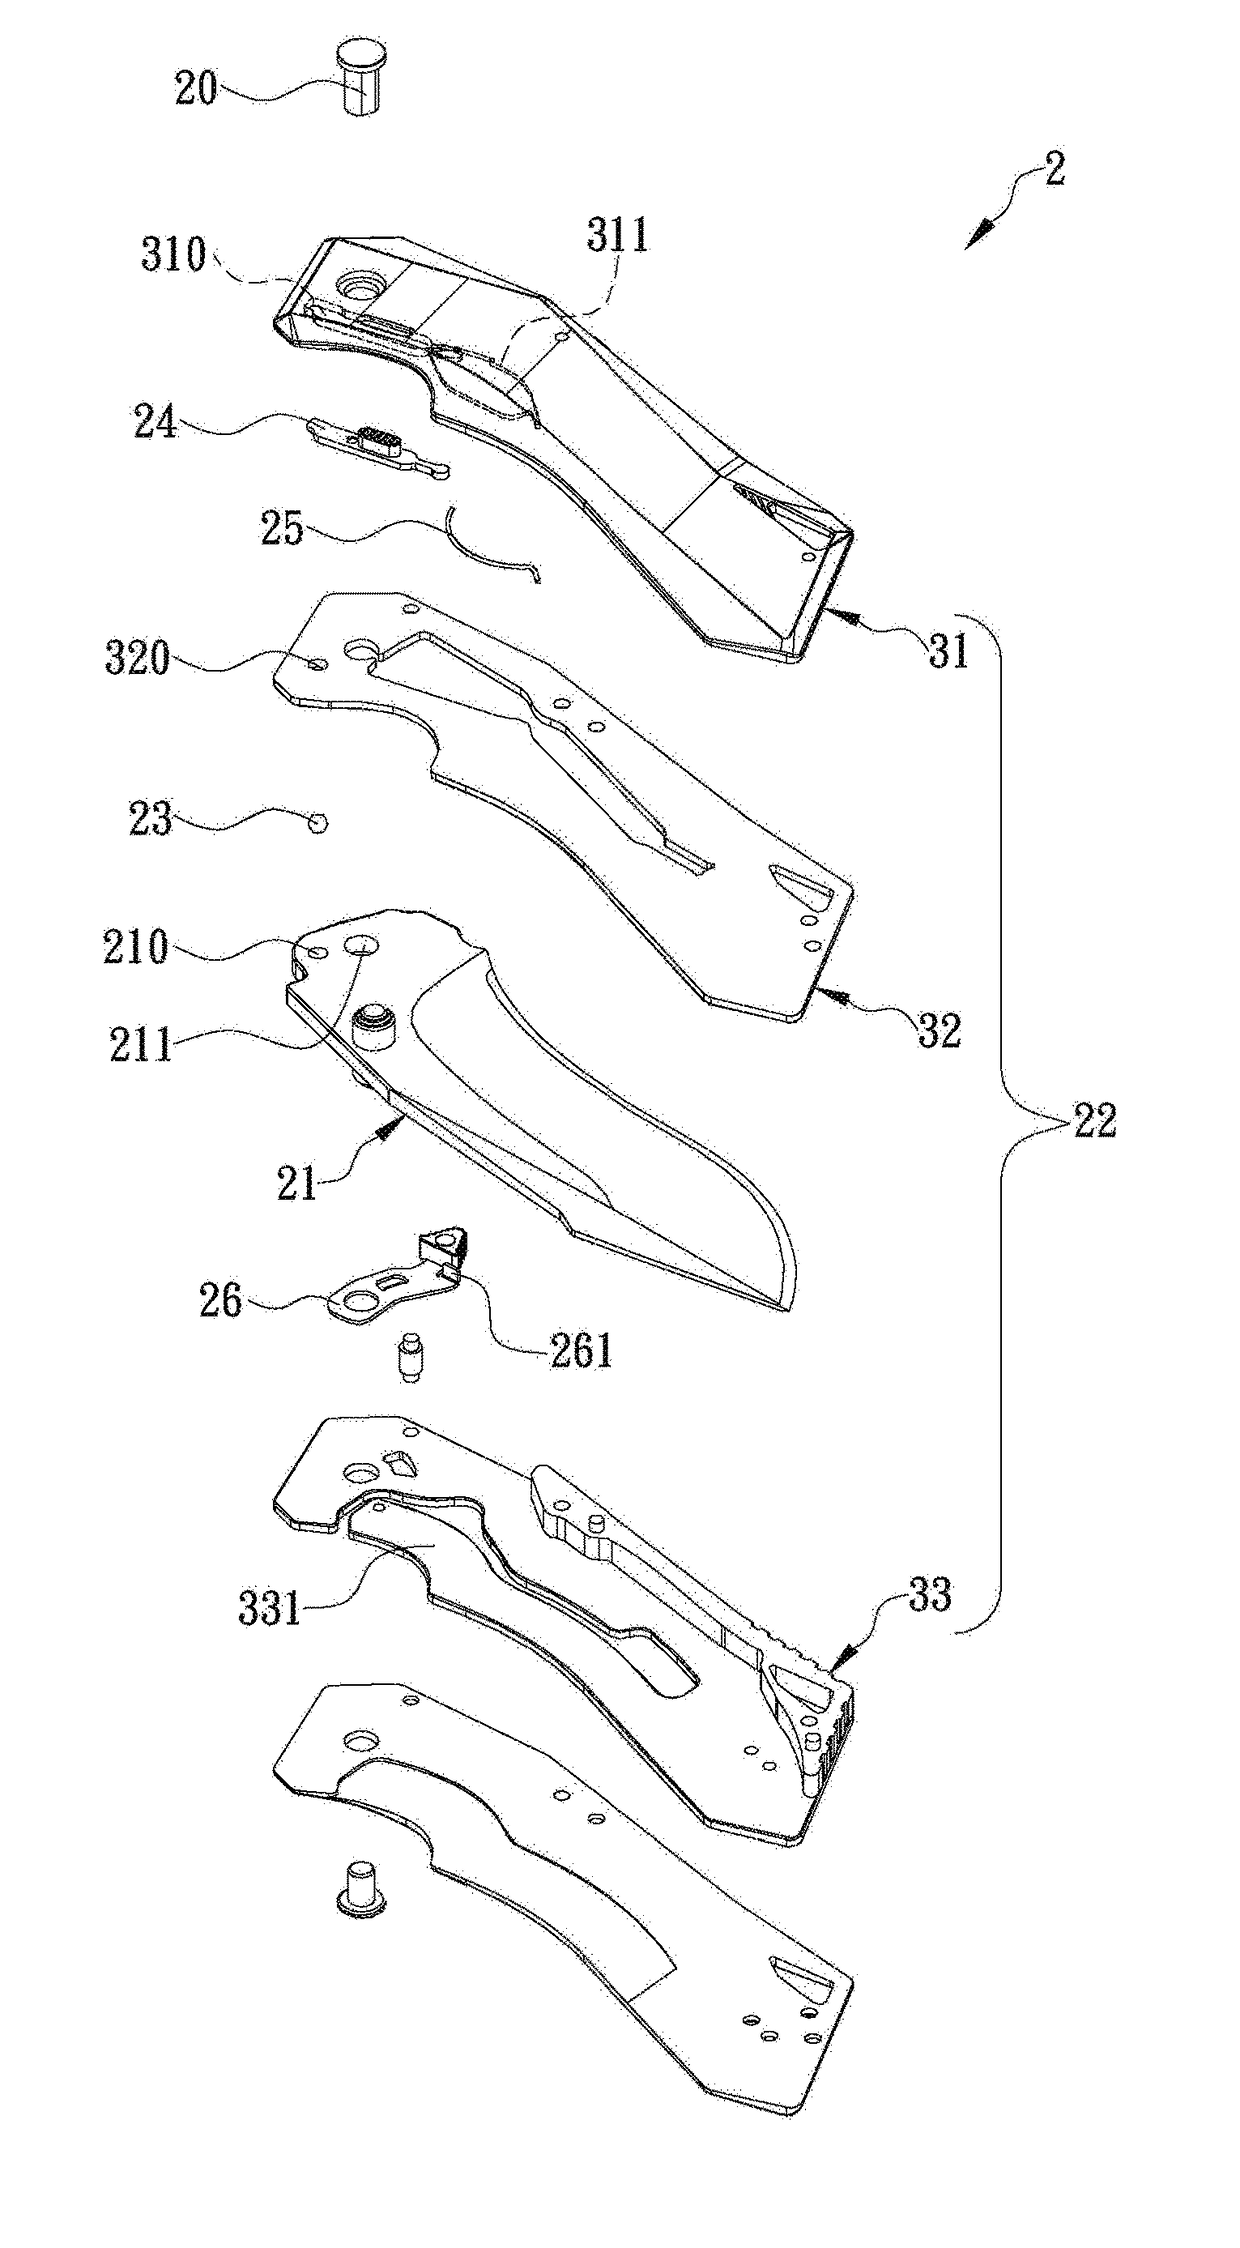 Knife configured to receive blade securely and safely